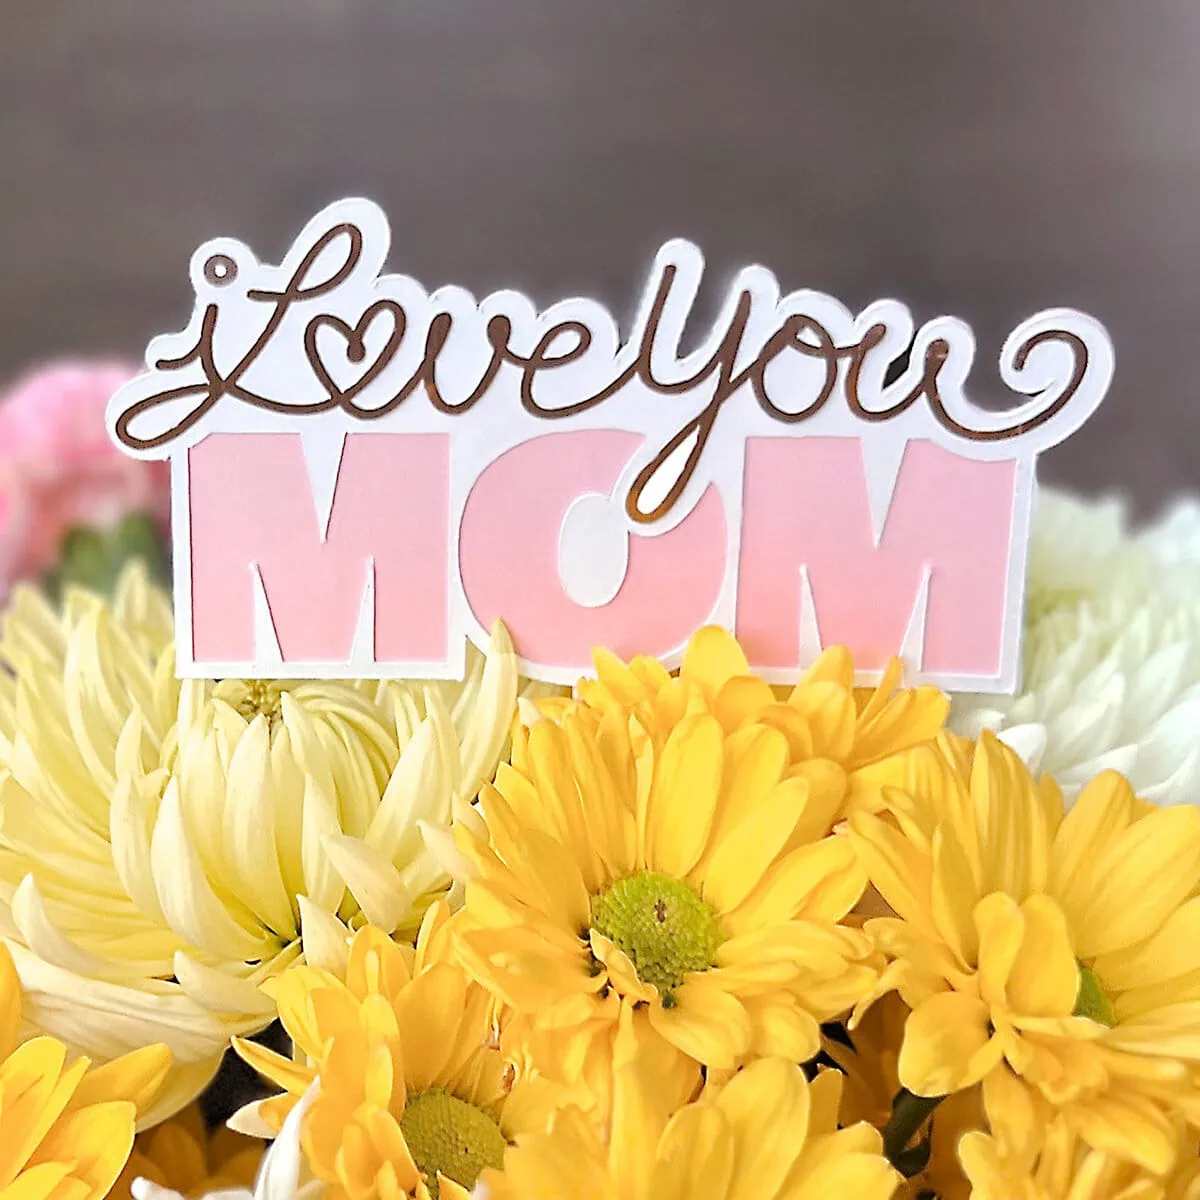 I Love You Mom SVG cut file designed by Jen Goode in flowers